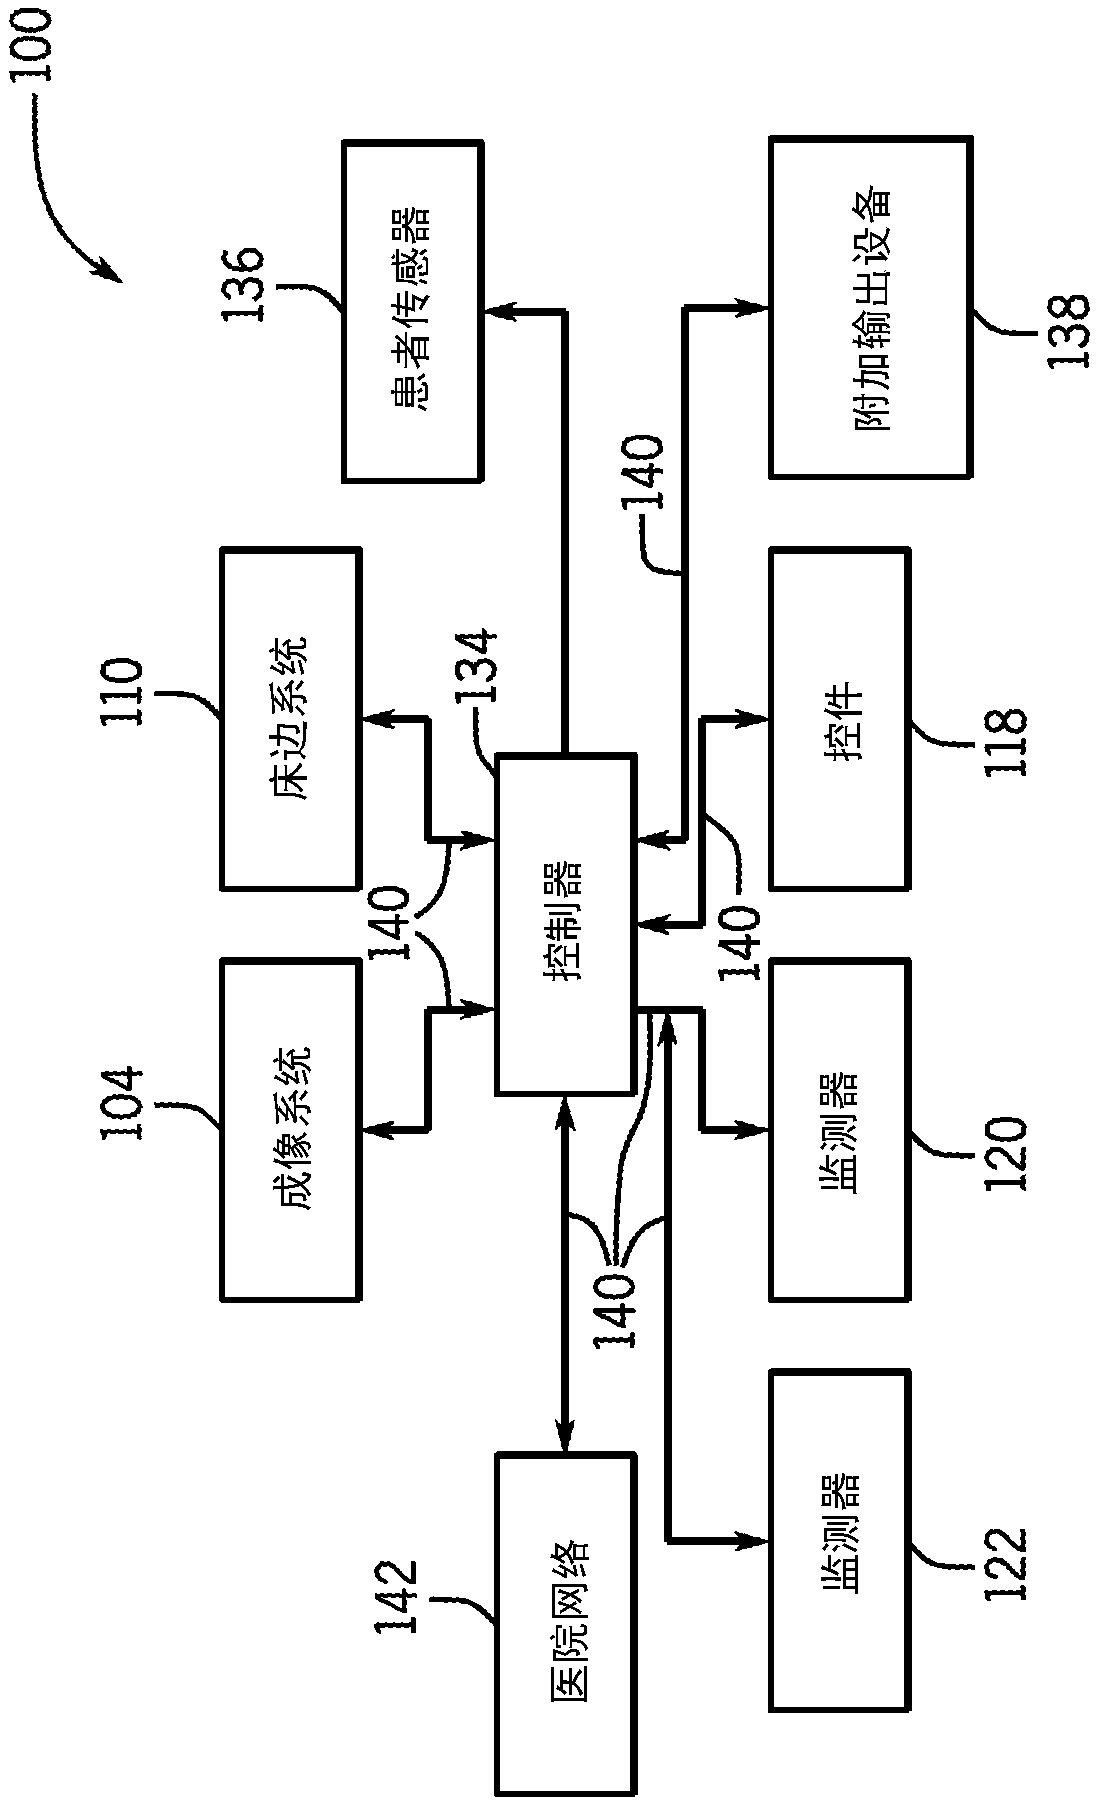 System and method for controlling x-ray frame rate of an imaging system